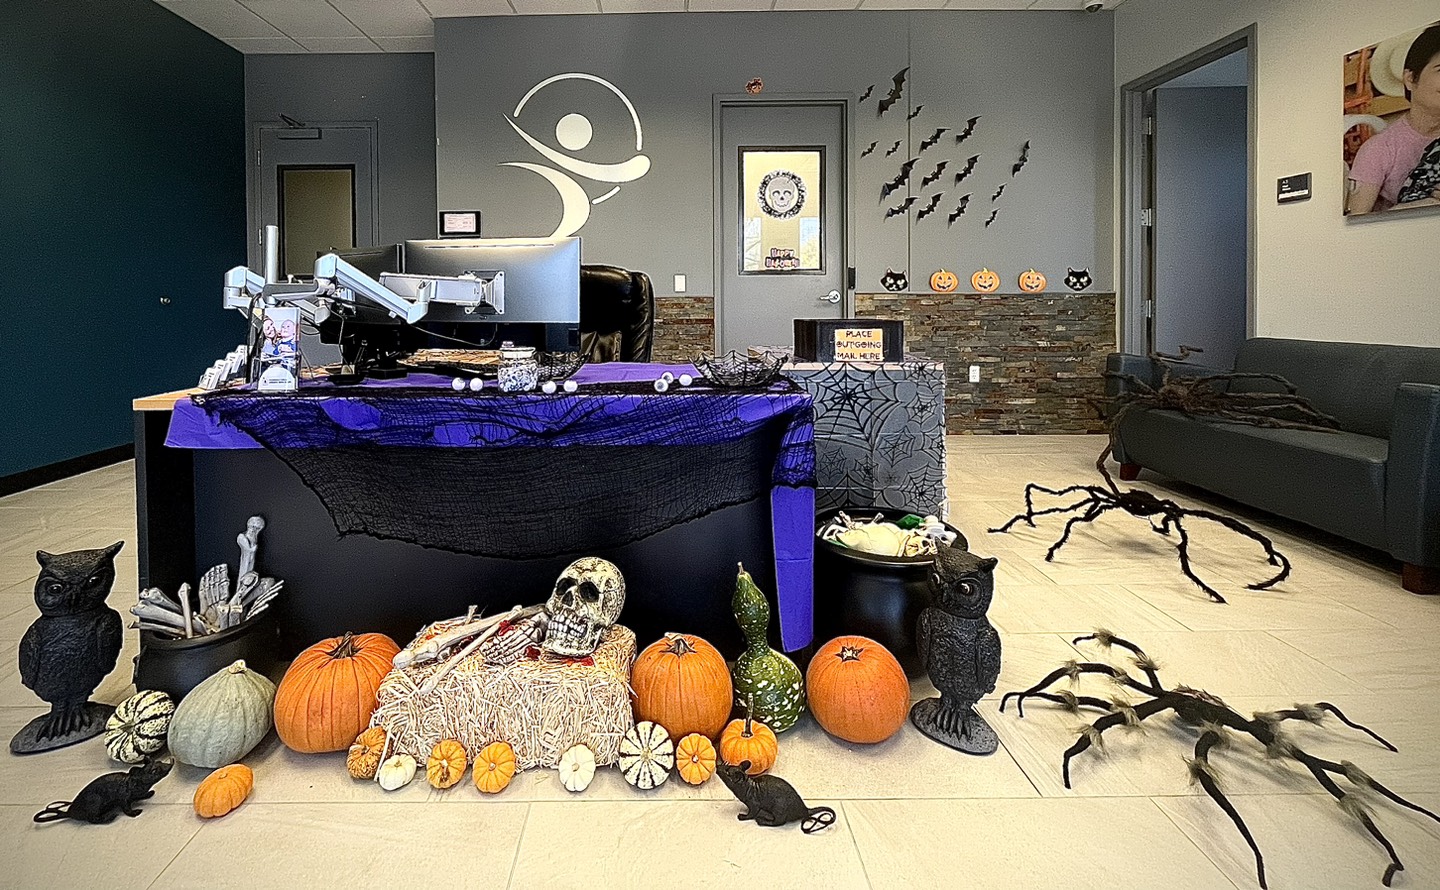 Office area with large spiders on the ground, black spiderwebs draped on the desks, pumpkins of different sizes in front of desk, with a skull and bones in cauldrons, black owls and rats, and bats on the wall.